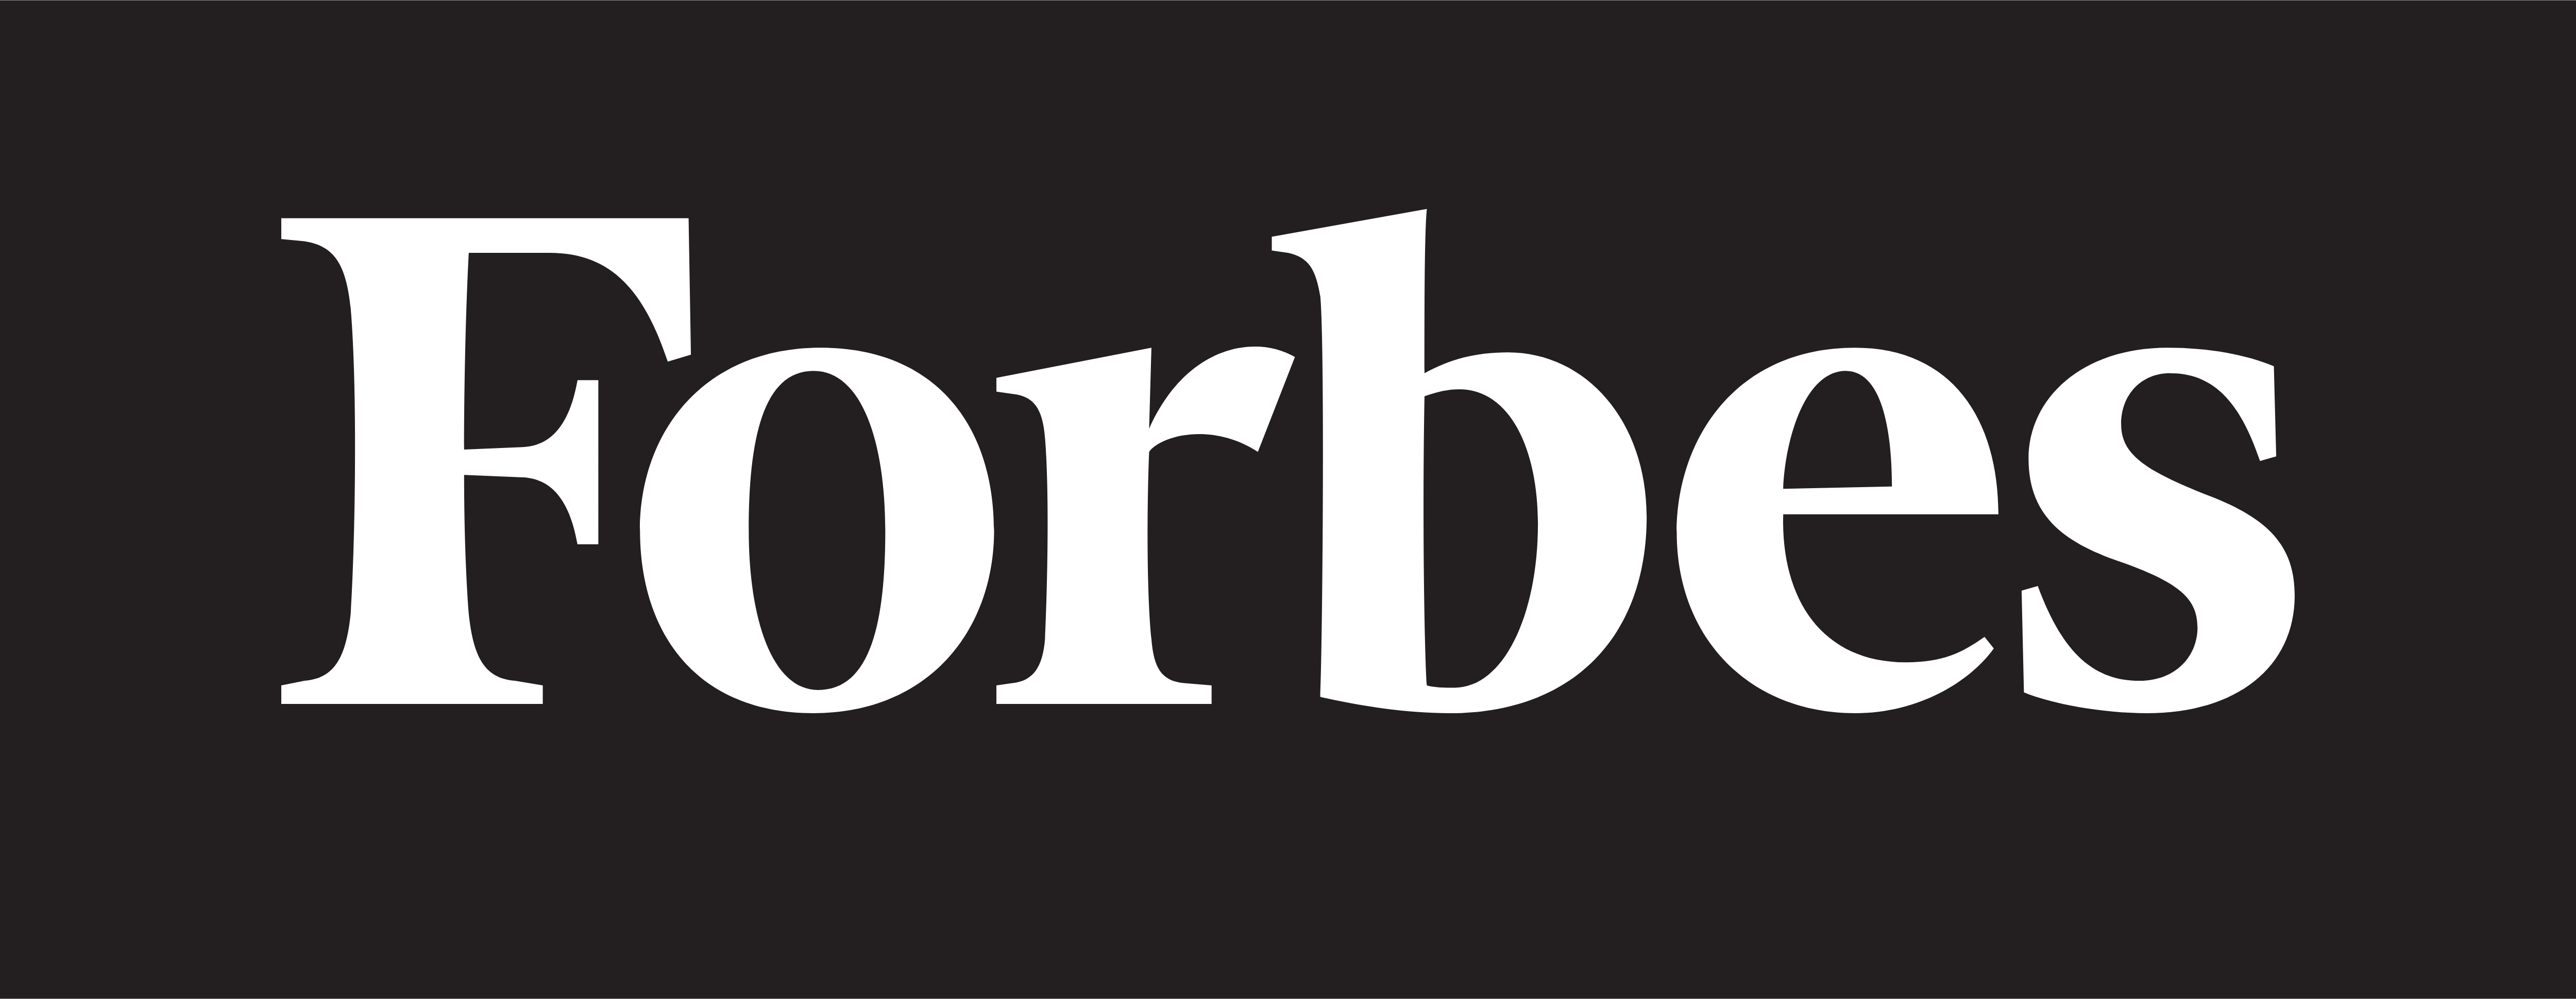 Forbes logo for article featuring TO112